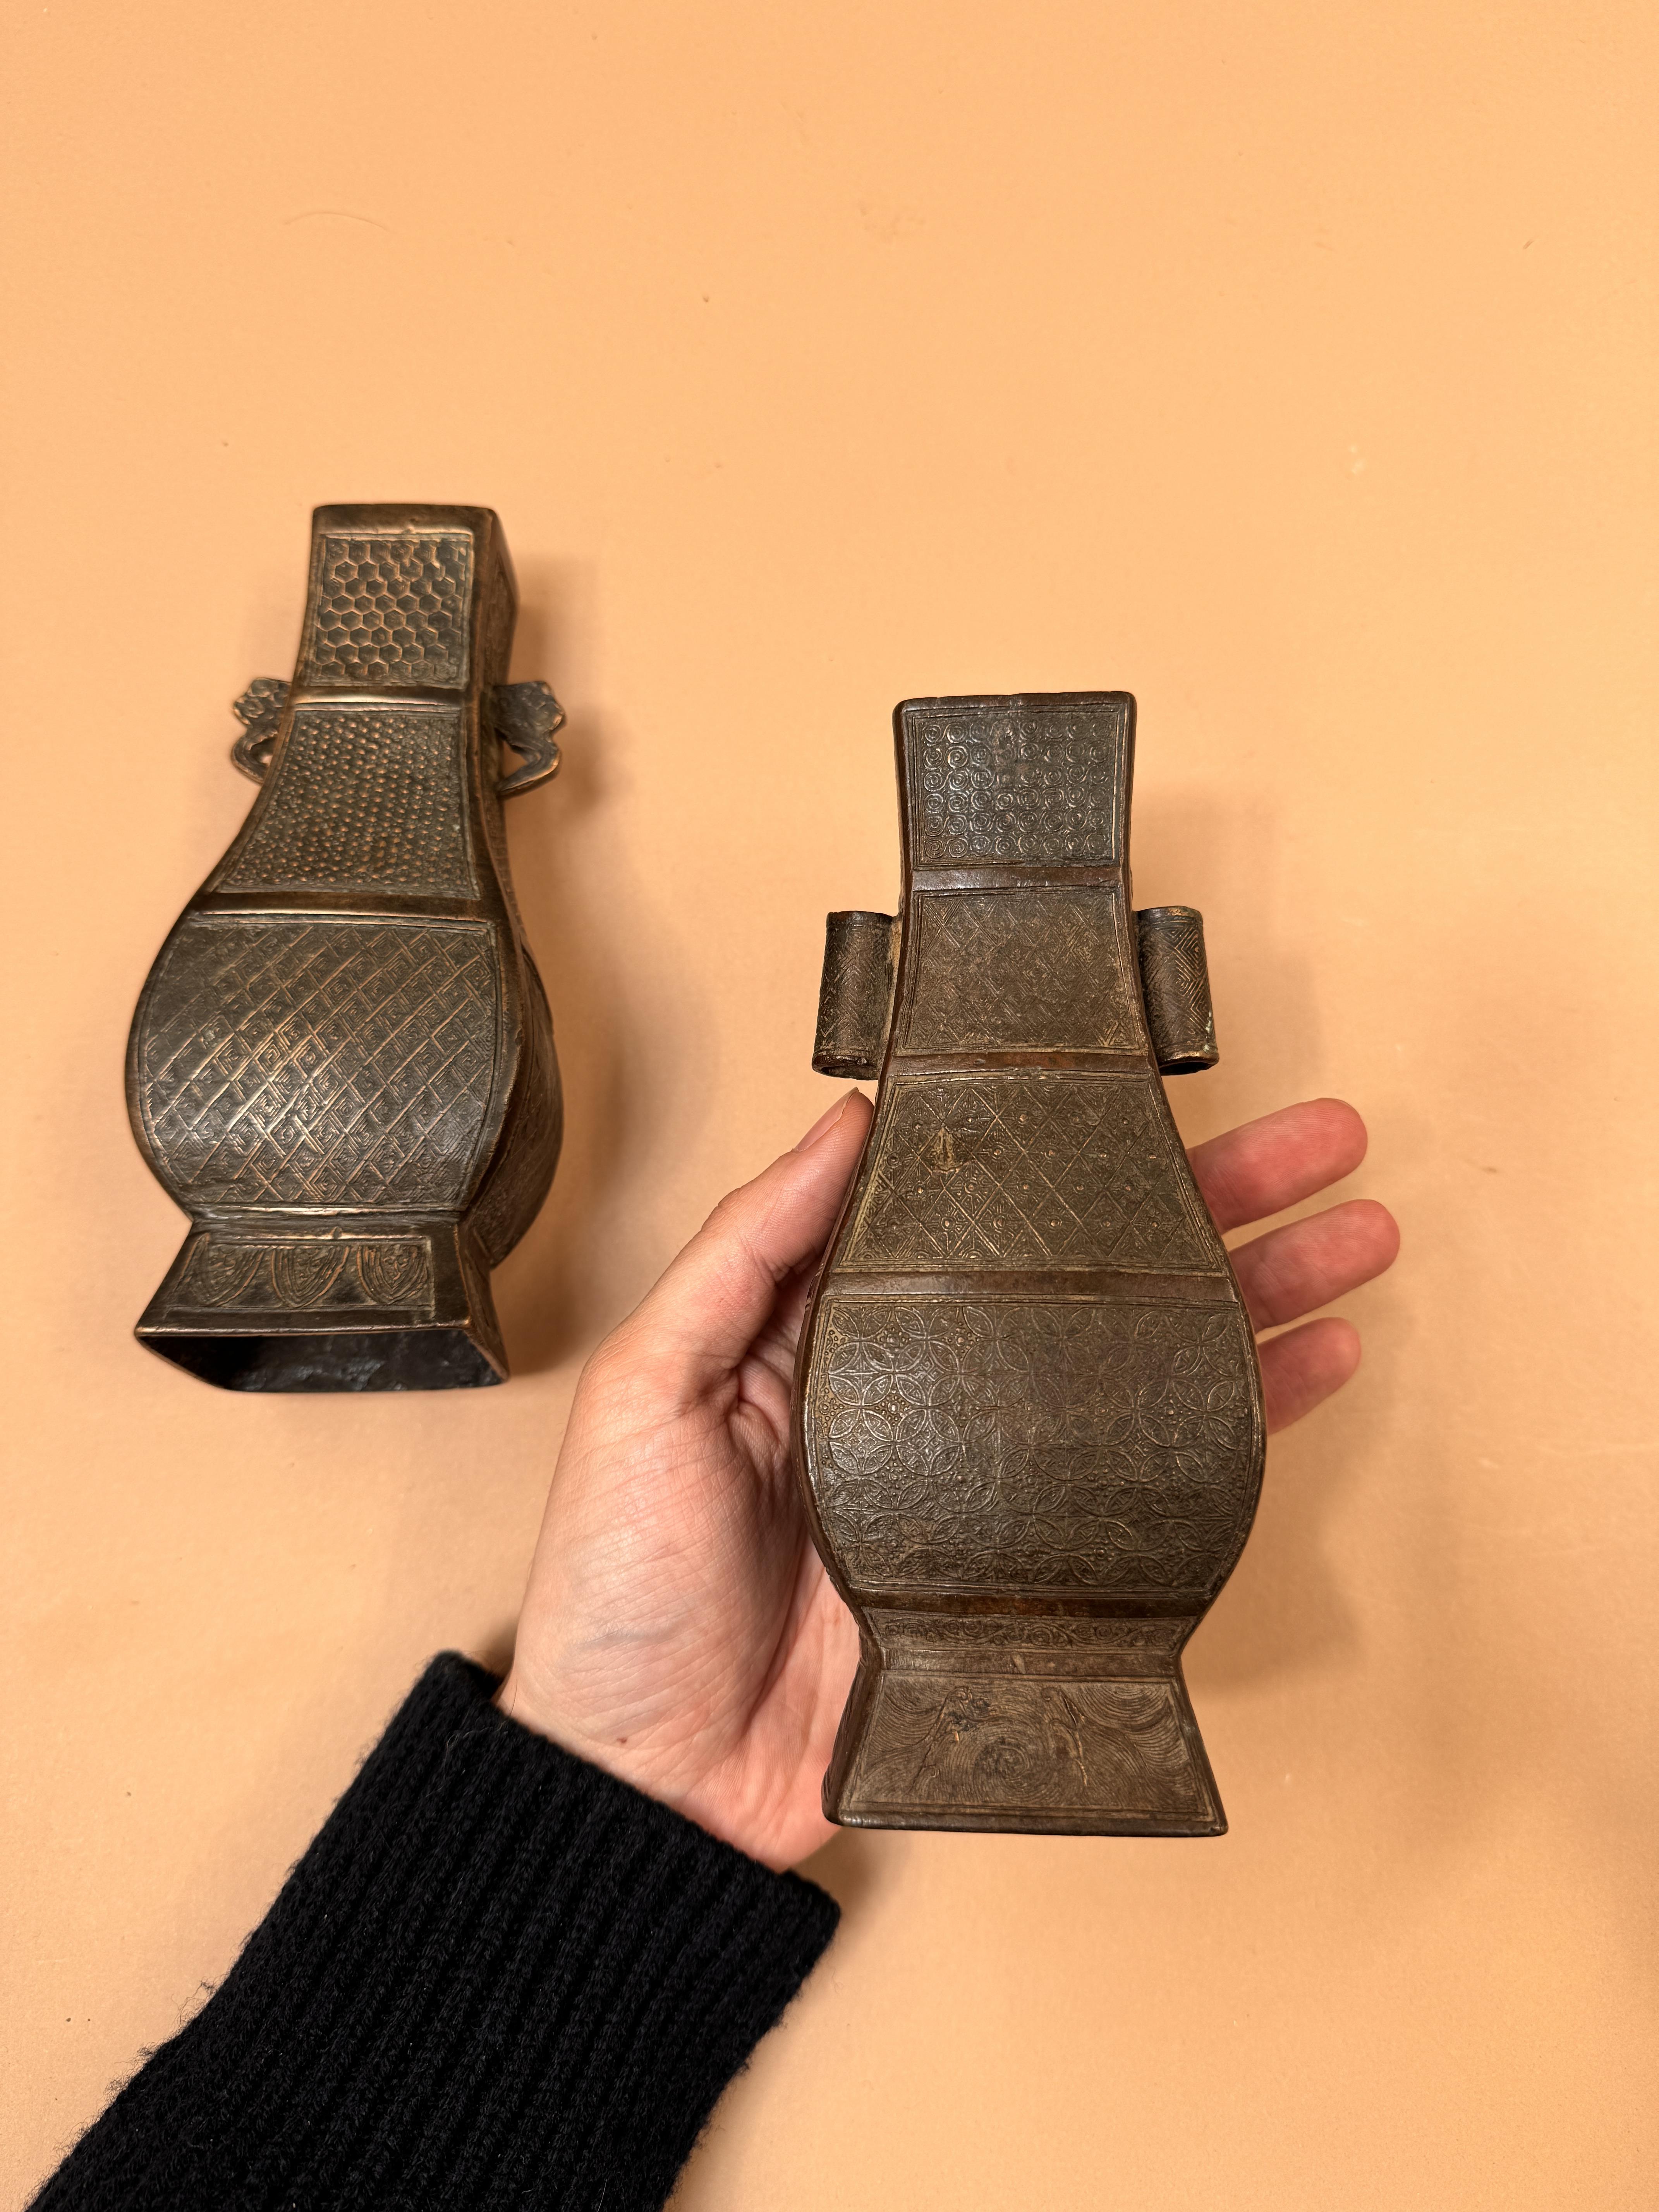 TWO SMALL CHINESE BRONZE ARCHAISTIC VASES 明 銅仿古方壺兩件 - Image 9 of 21